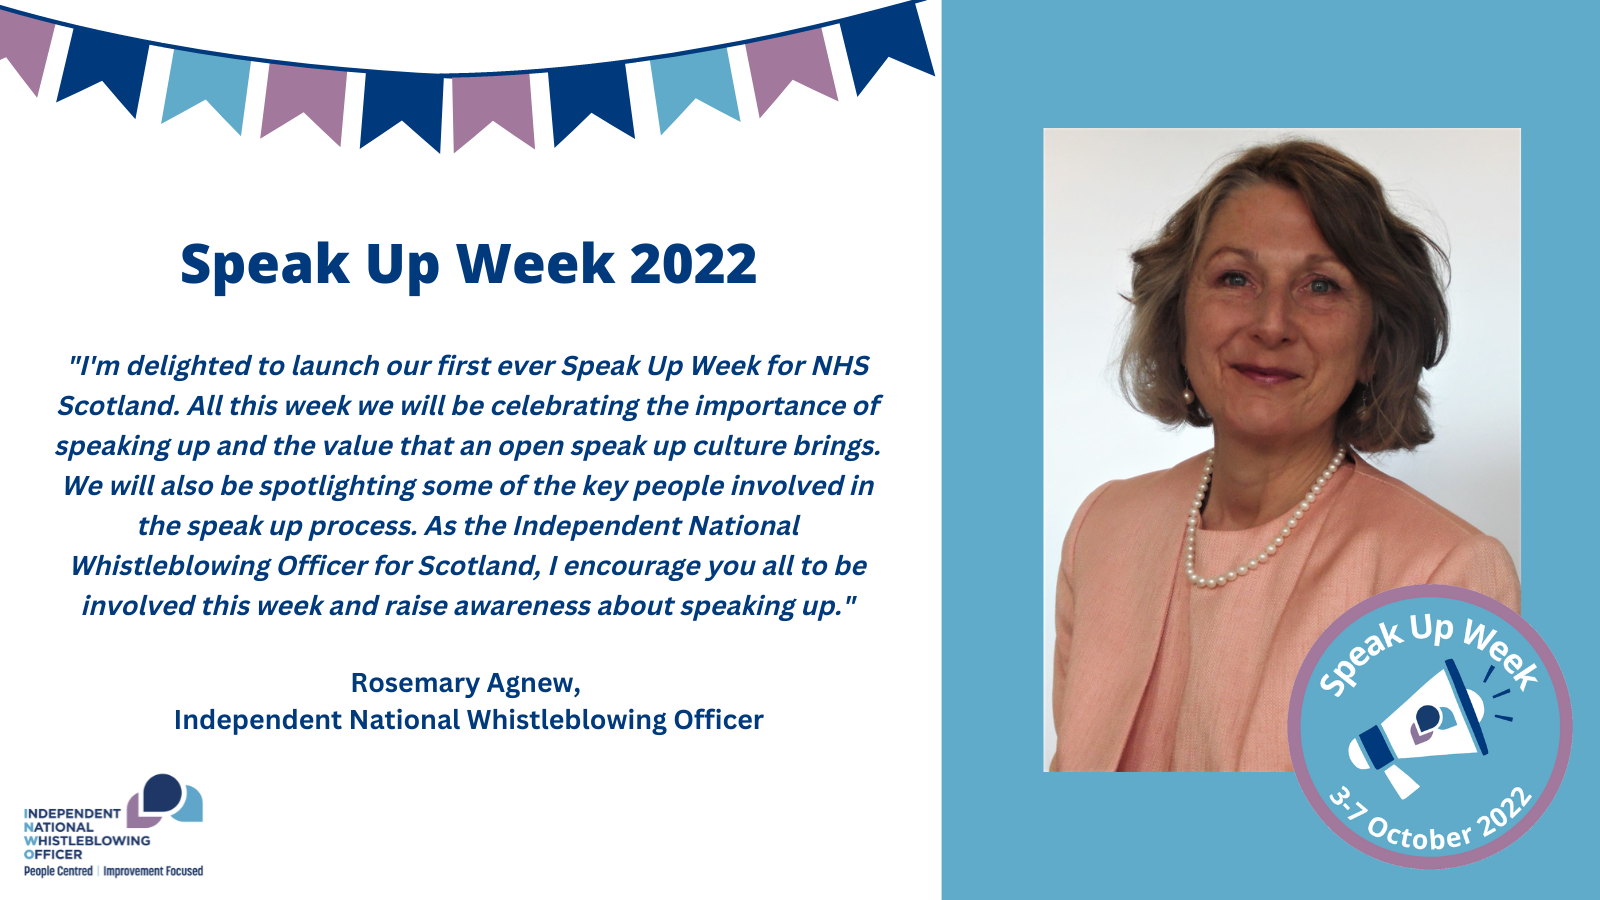 A picture of the INWO, Rosemary Agnew, with an accompanying quote:"I'm delighted to launch our first ever Speak Up Week for NHS Scotland. All this week we will be celebrating the importance of speaking up and the value that an open speak up culture brings. We will also be spotlighting some of the key people involved in the speak up process. As the Independent National Whistleblowing Officer for Scotland, I encourage you all to be involved this week and raise awareness about speaking up."